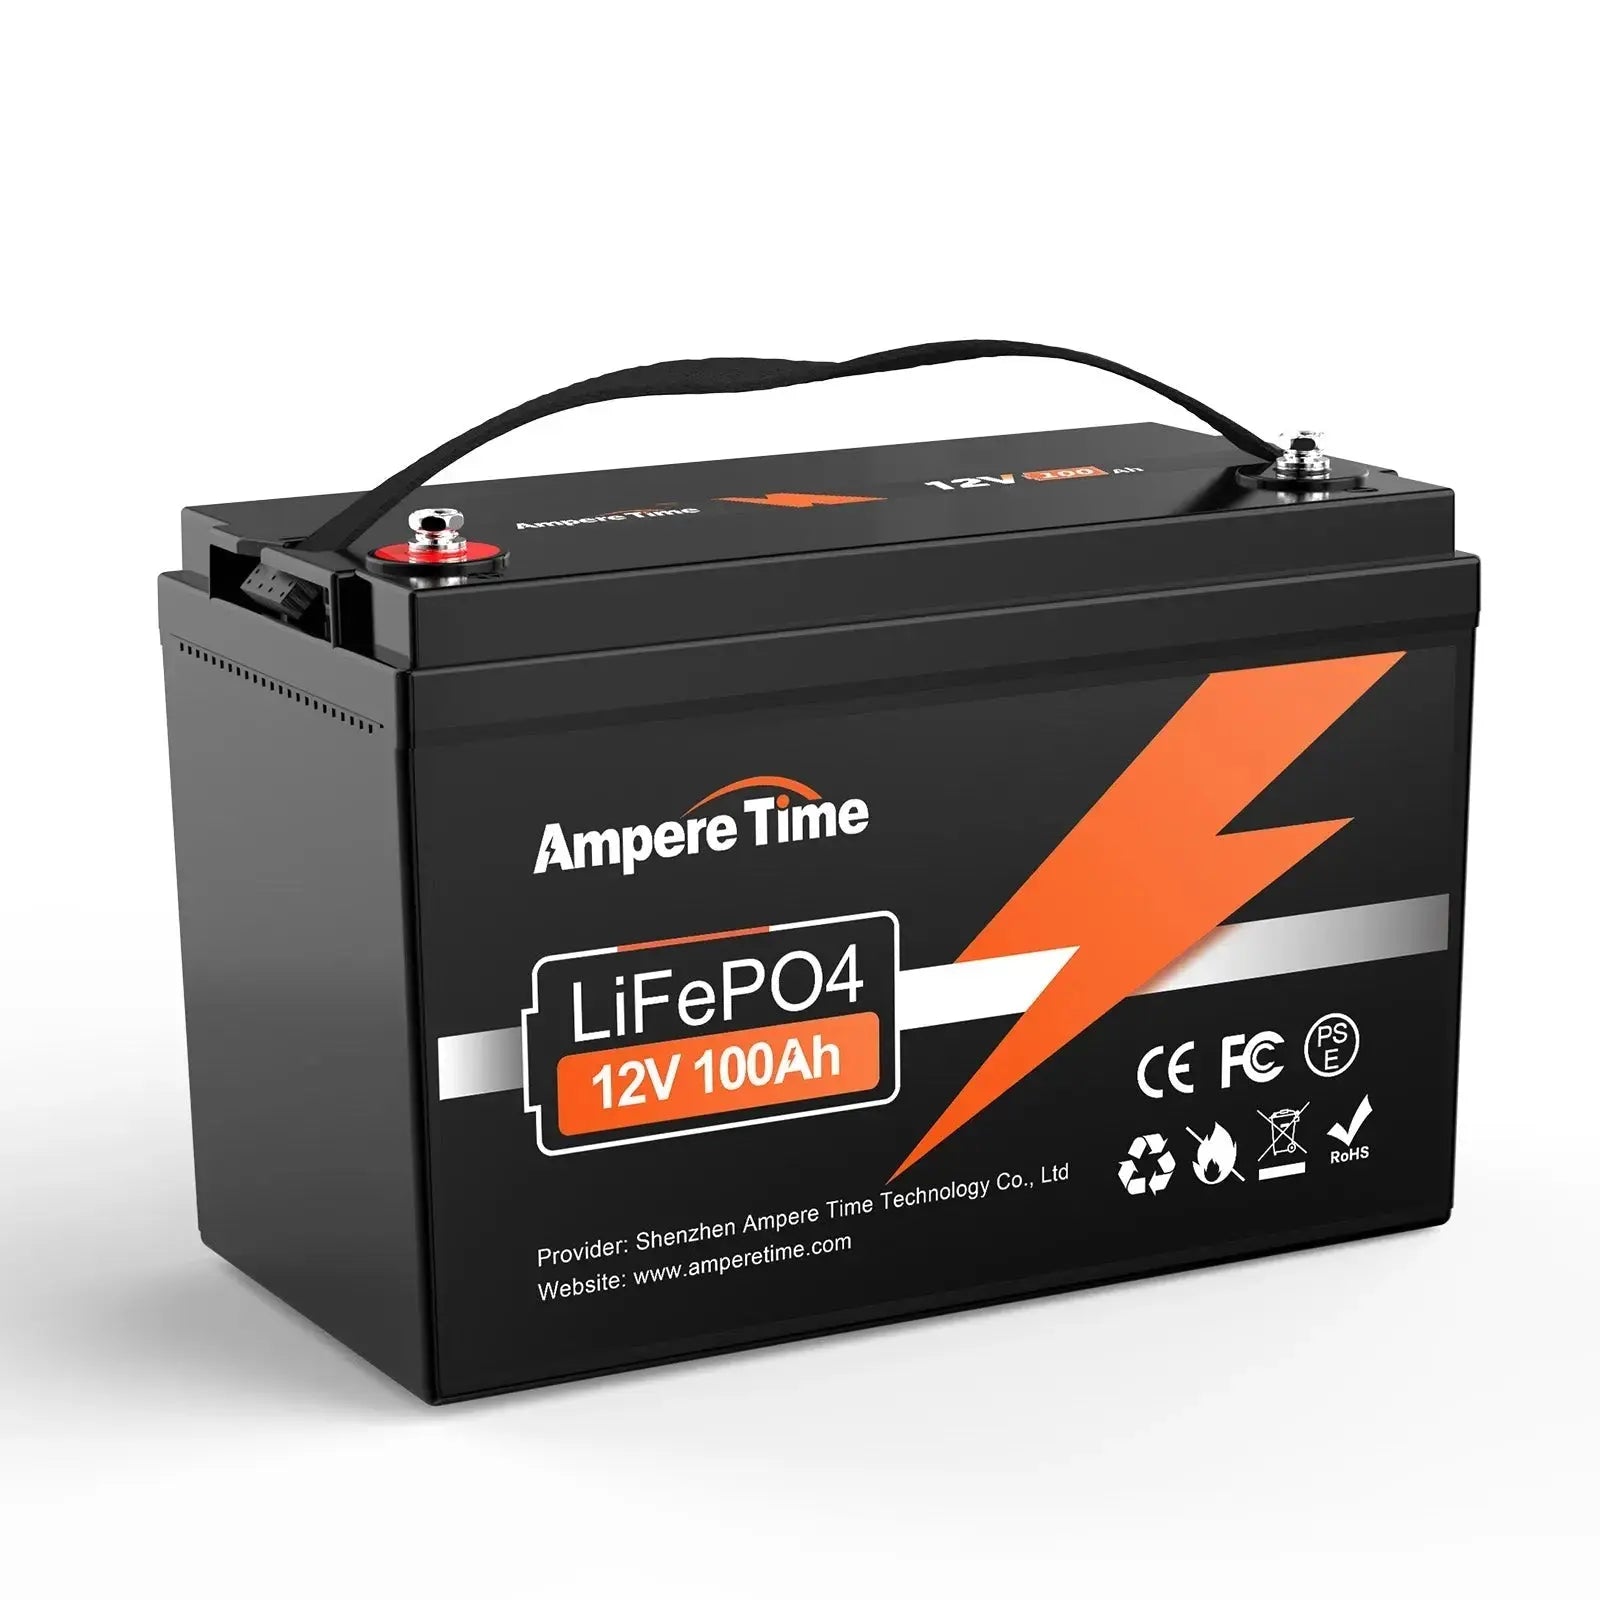 ✅Like New✅ Ampere Time 12V 100Ah, 1280Wh Best RV Lithium Battery with 4000+ Deep Cycles & Built in 100A BMS https://www.litime.com/collections/12v-batteries/products/litime-12v-100ah-lithium-lifepo4-battery